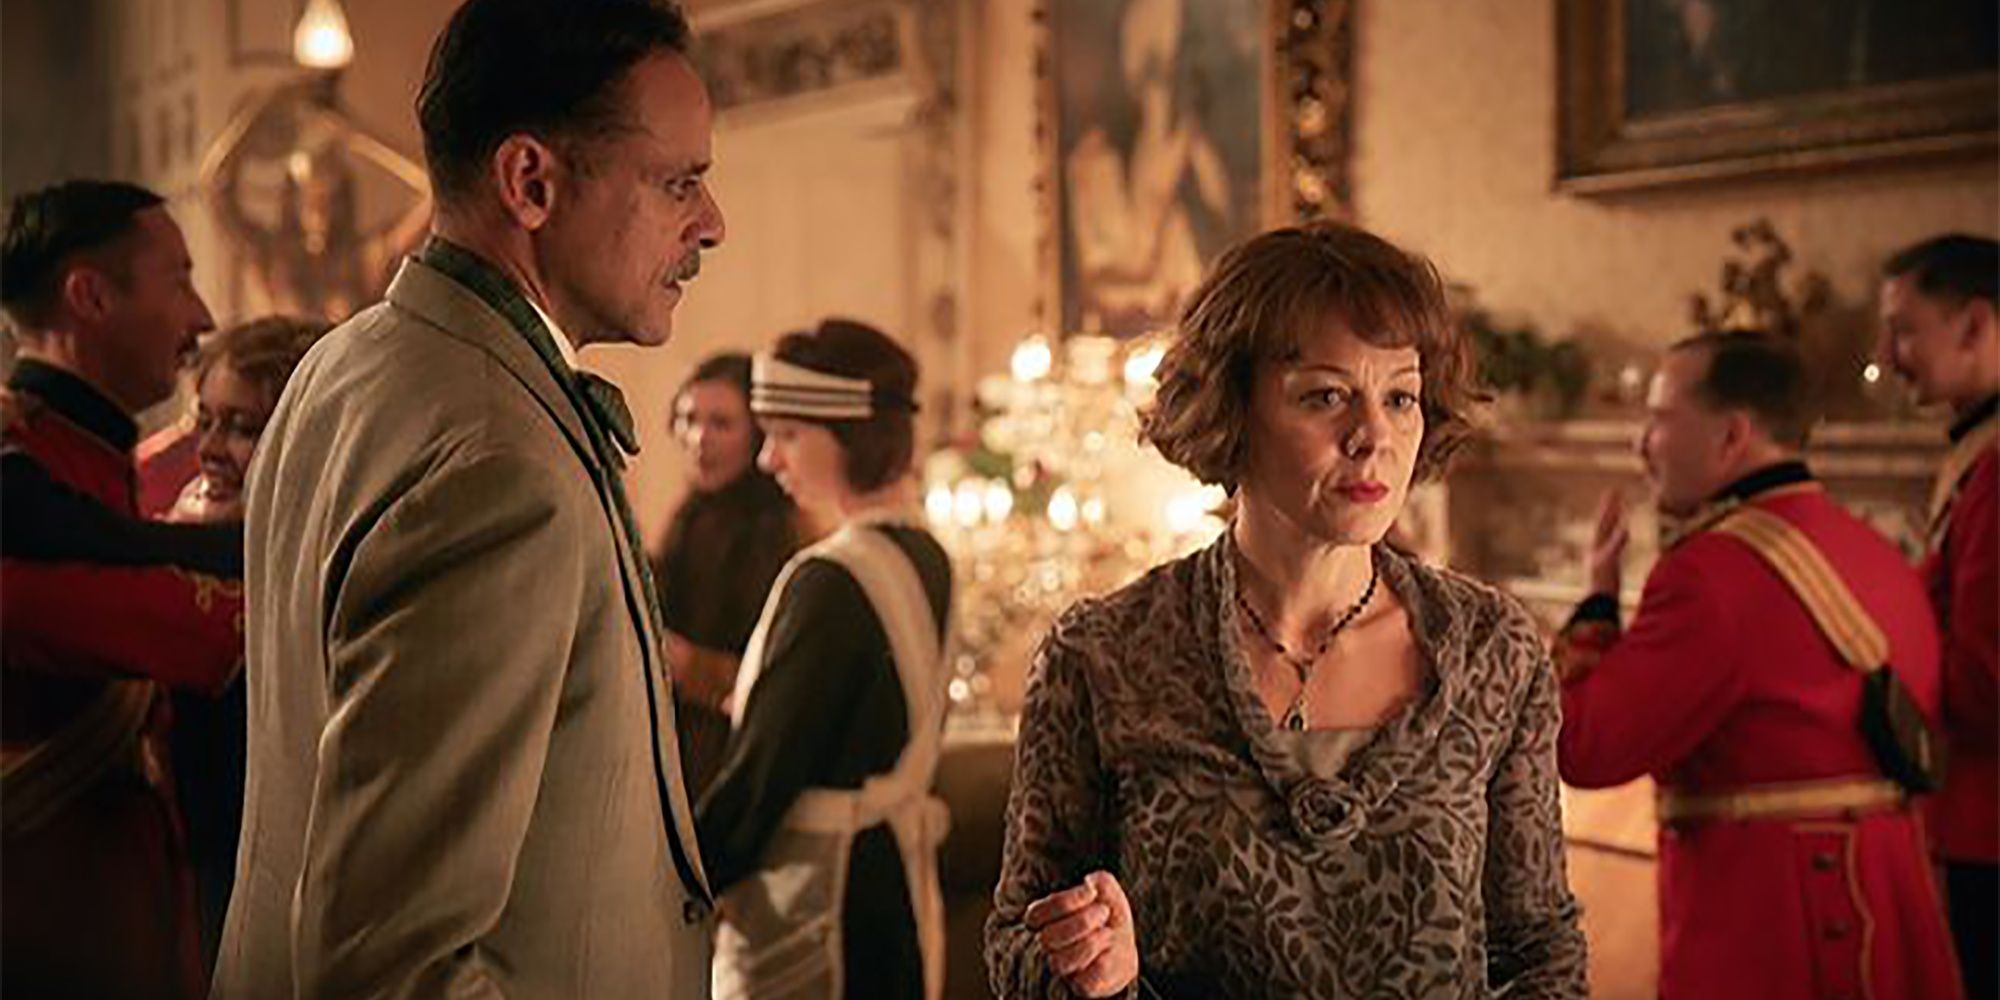 Ruben flirts with Polly at the wedding in Peaky Blinders